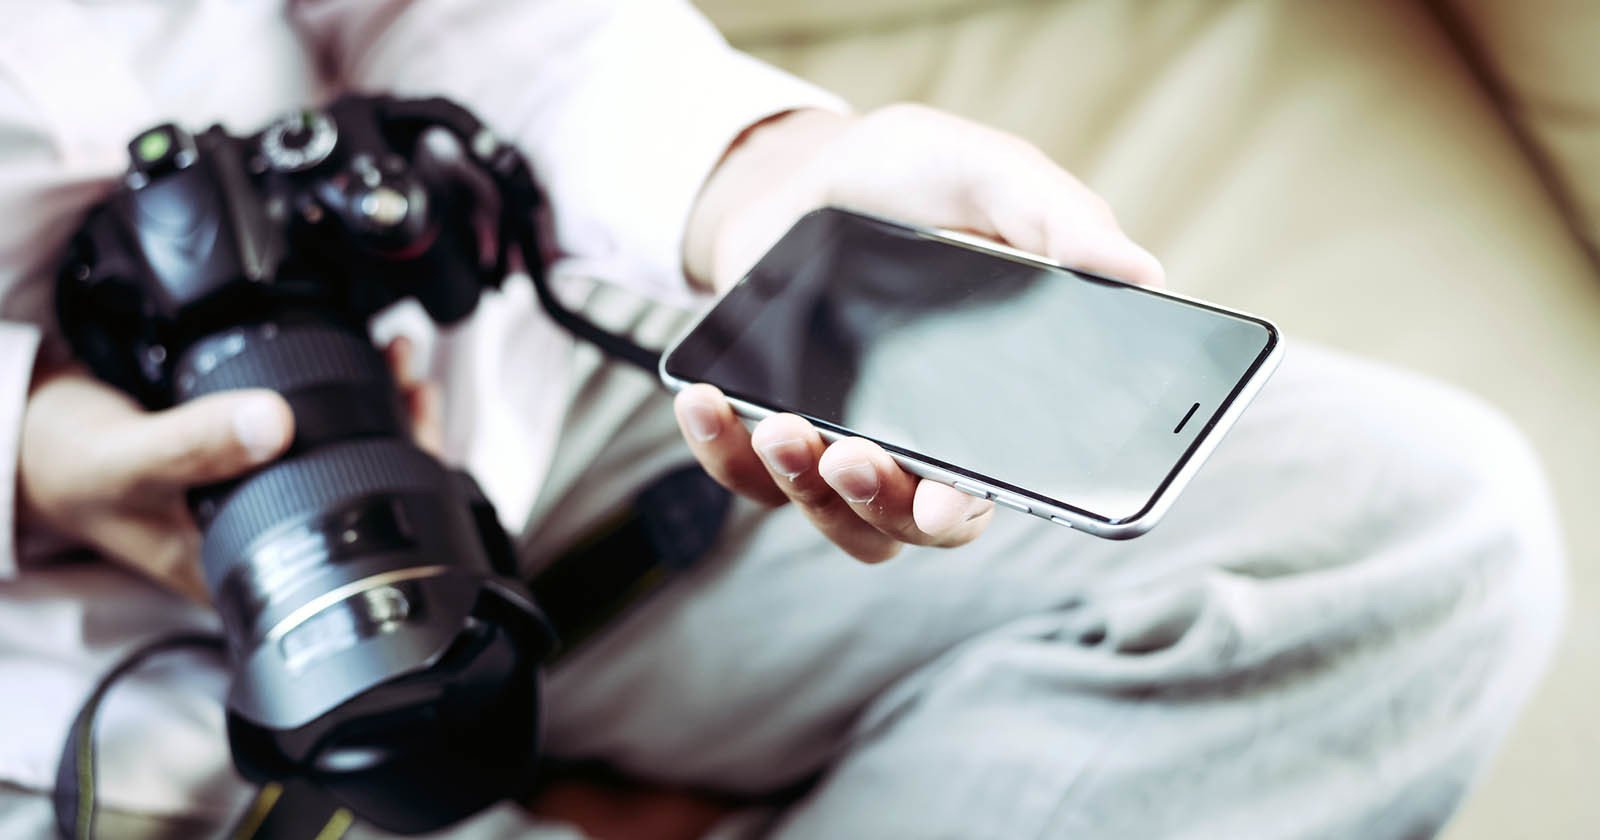 The Best Way to Access Camera Raw Photos on Your Smartphone